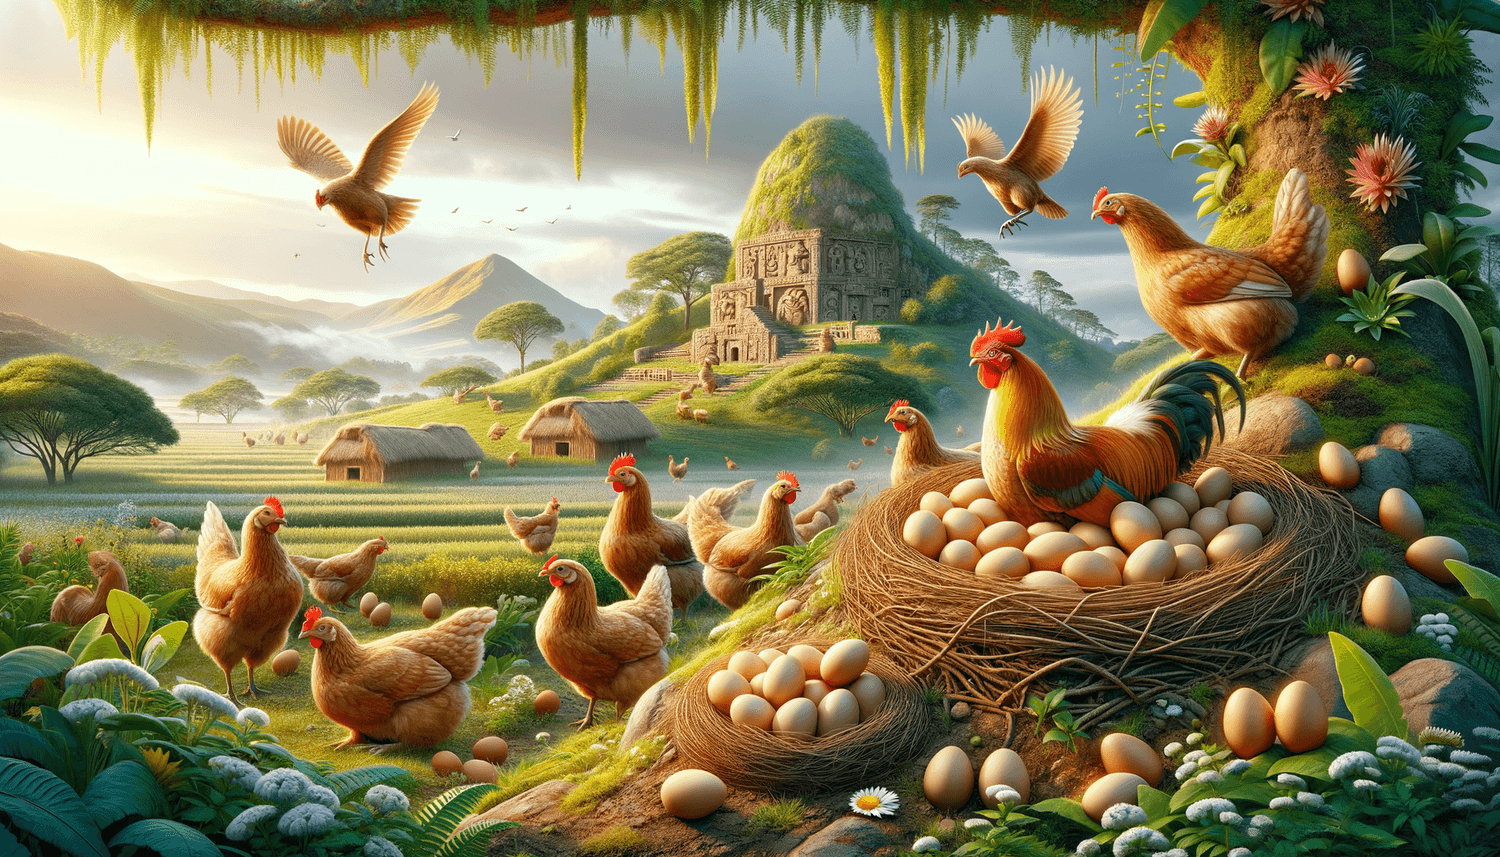 Where Do Chickens Come From?